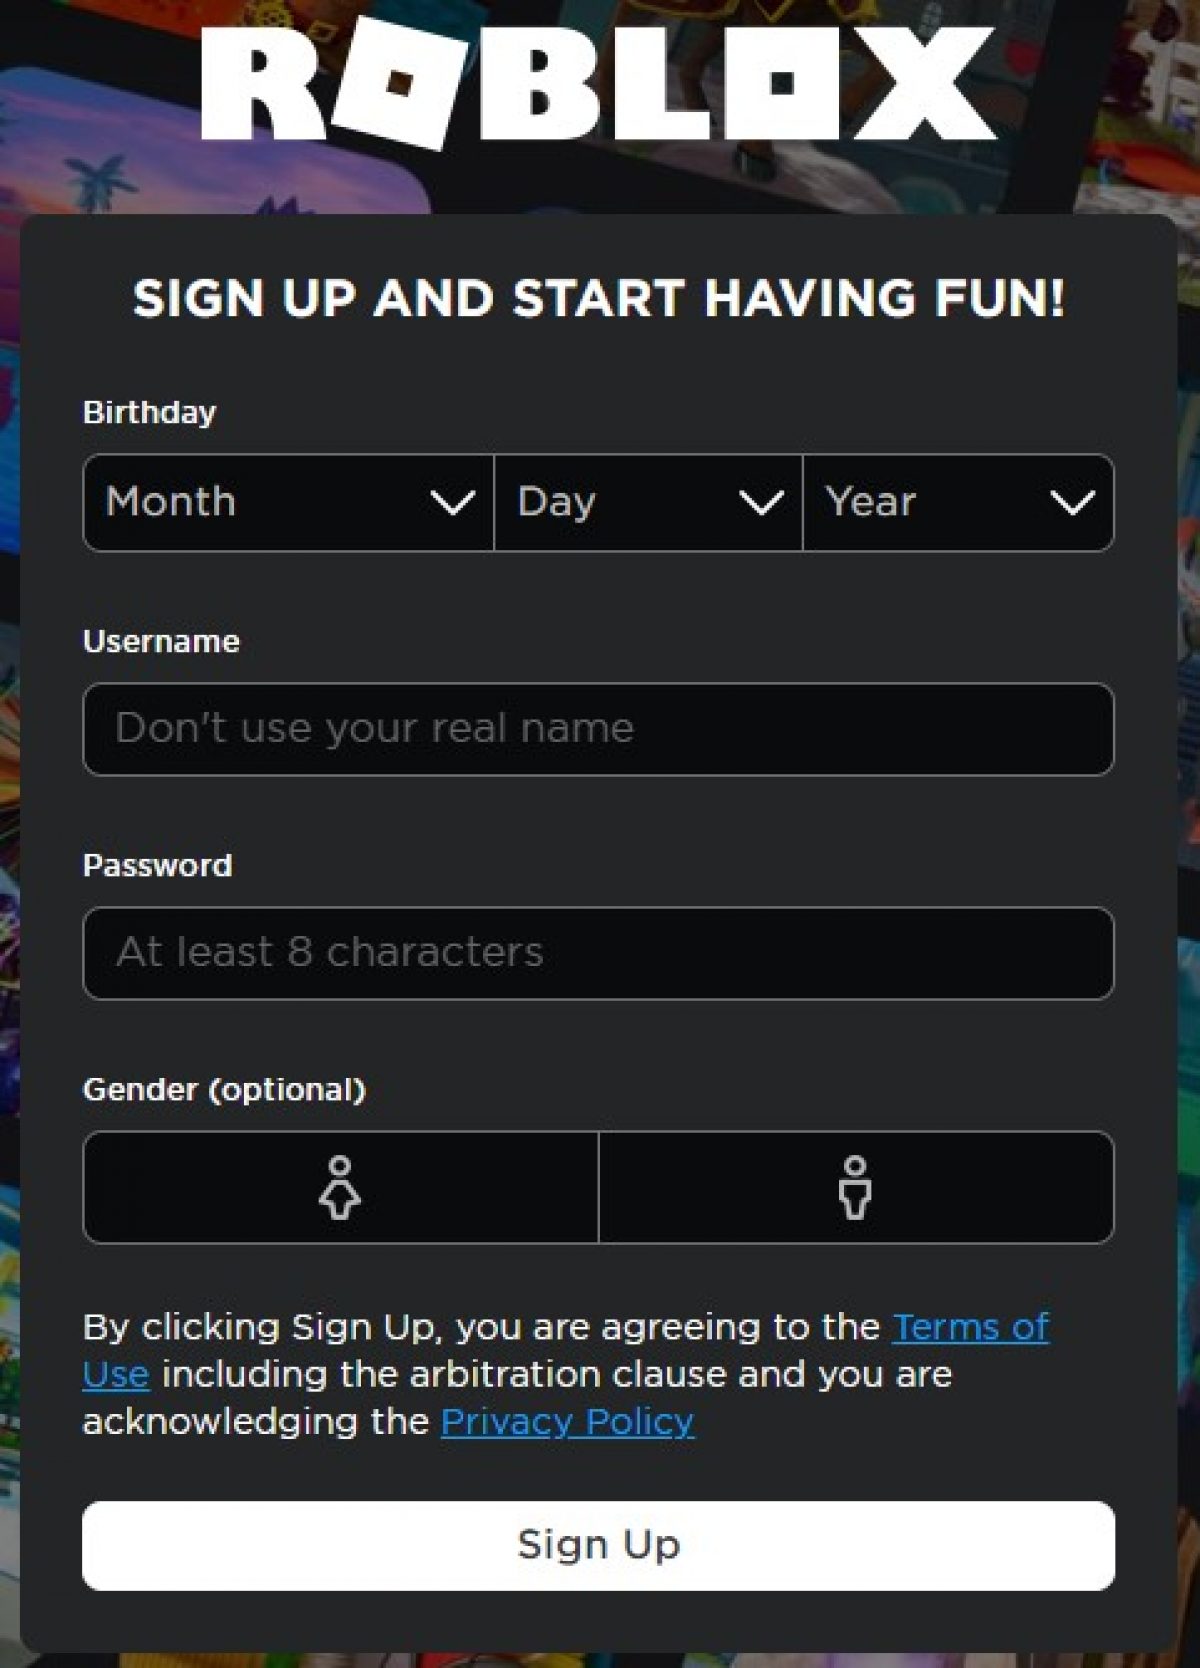 How to change my birthday on roblox